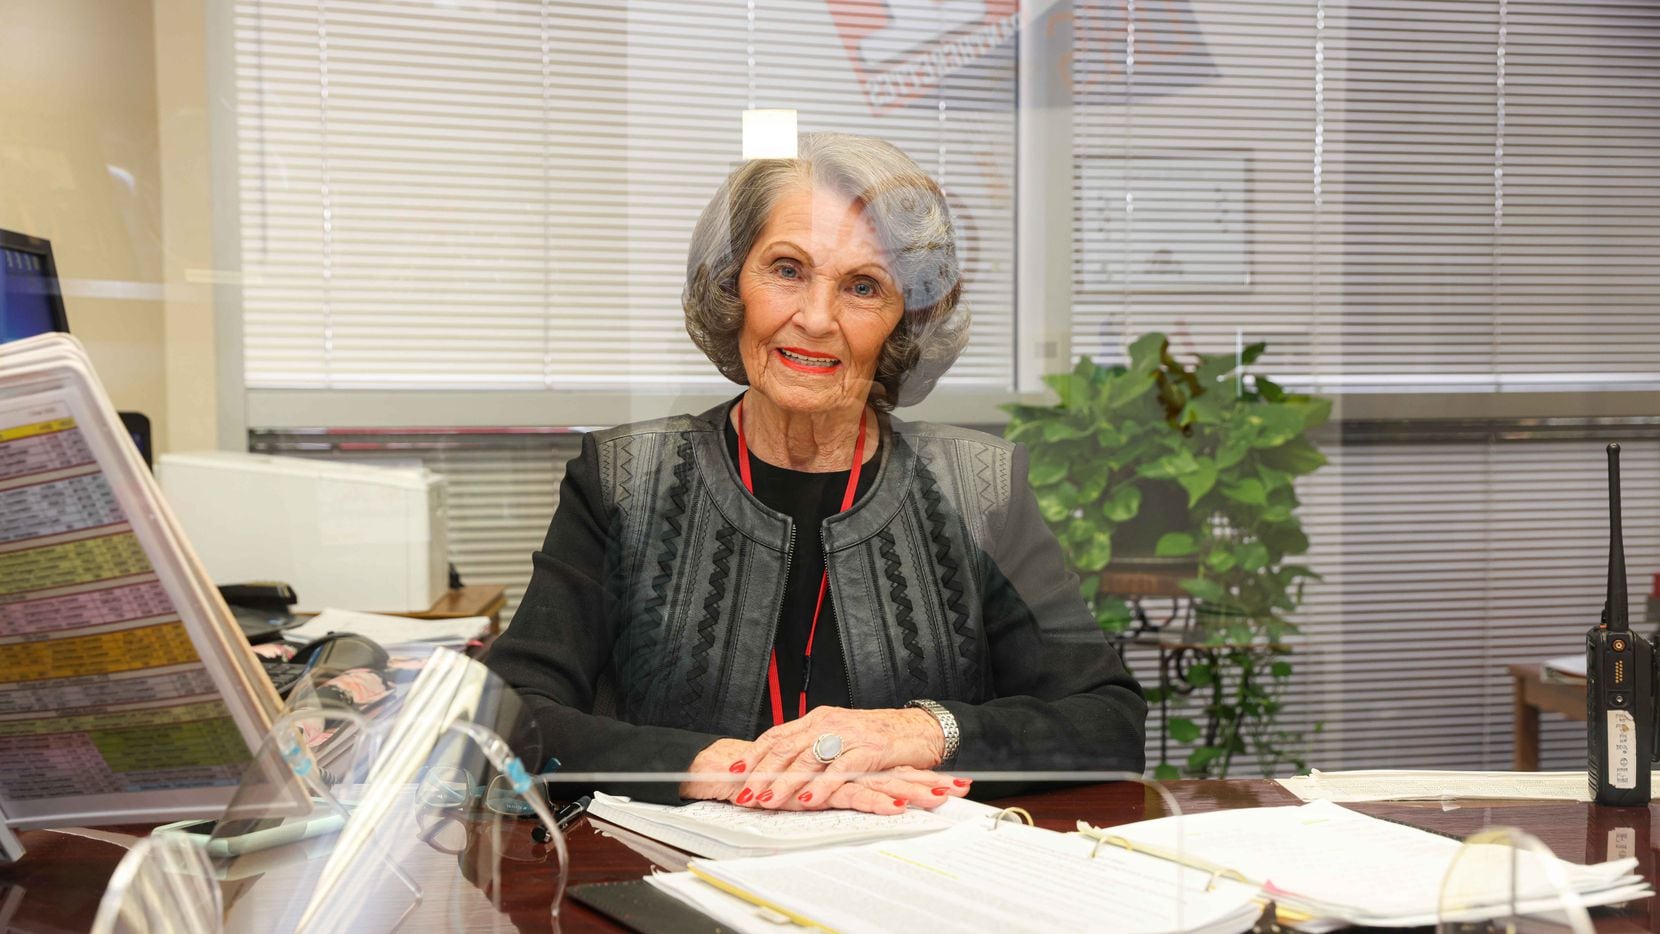 Flo Judd poses behind a plexiglass at her office in Duncanville on Friday, January 29, 2021. Judd, 81-year-old associate principal at Duncanville High School, is in her 50th year in education. Like nearly all K-12 educators in Texas, she's working on campus every day, but she hasn't been able to find a coronavirus vaccine, despite signing up with multiple counties around the Dallas area. (Lola Gomez/The Dallas Morning News)